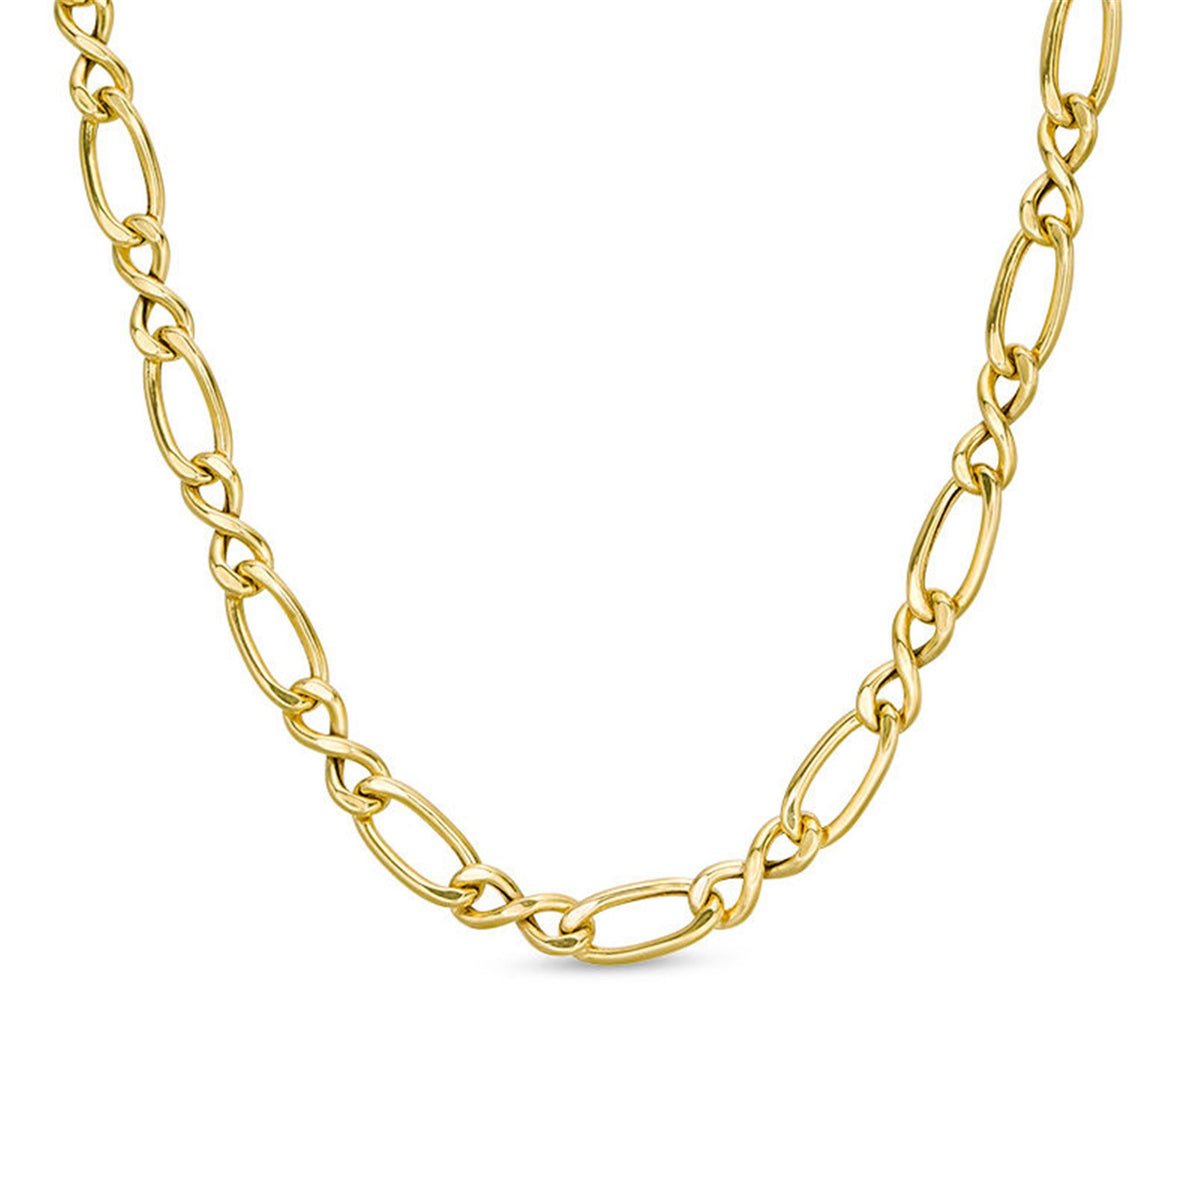 20" 14K Yellow Gold Figaro Infinity Chain Link Necklace